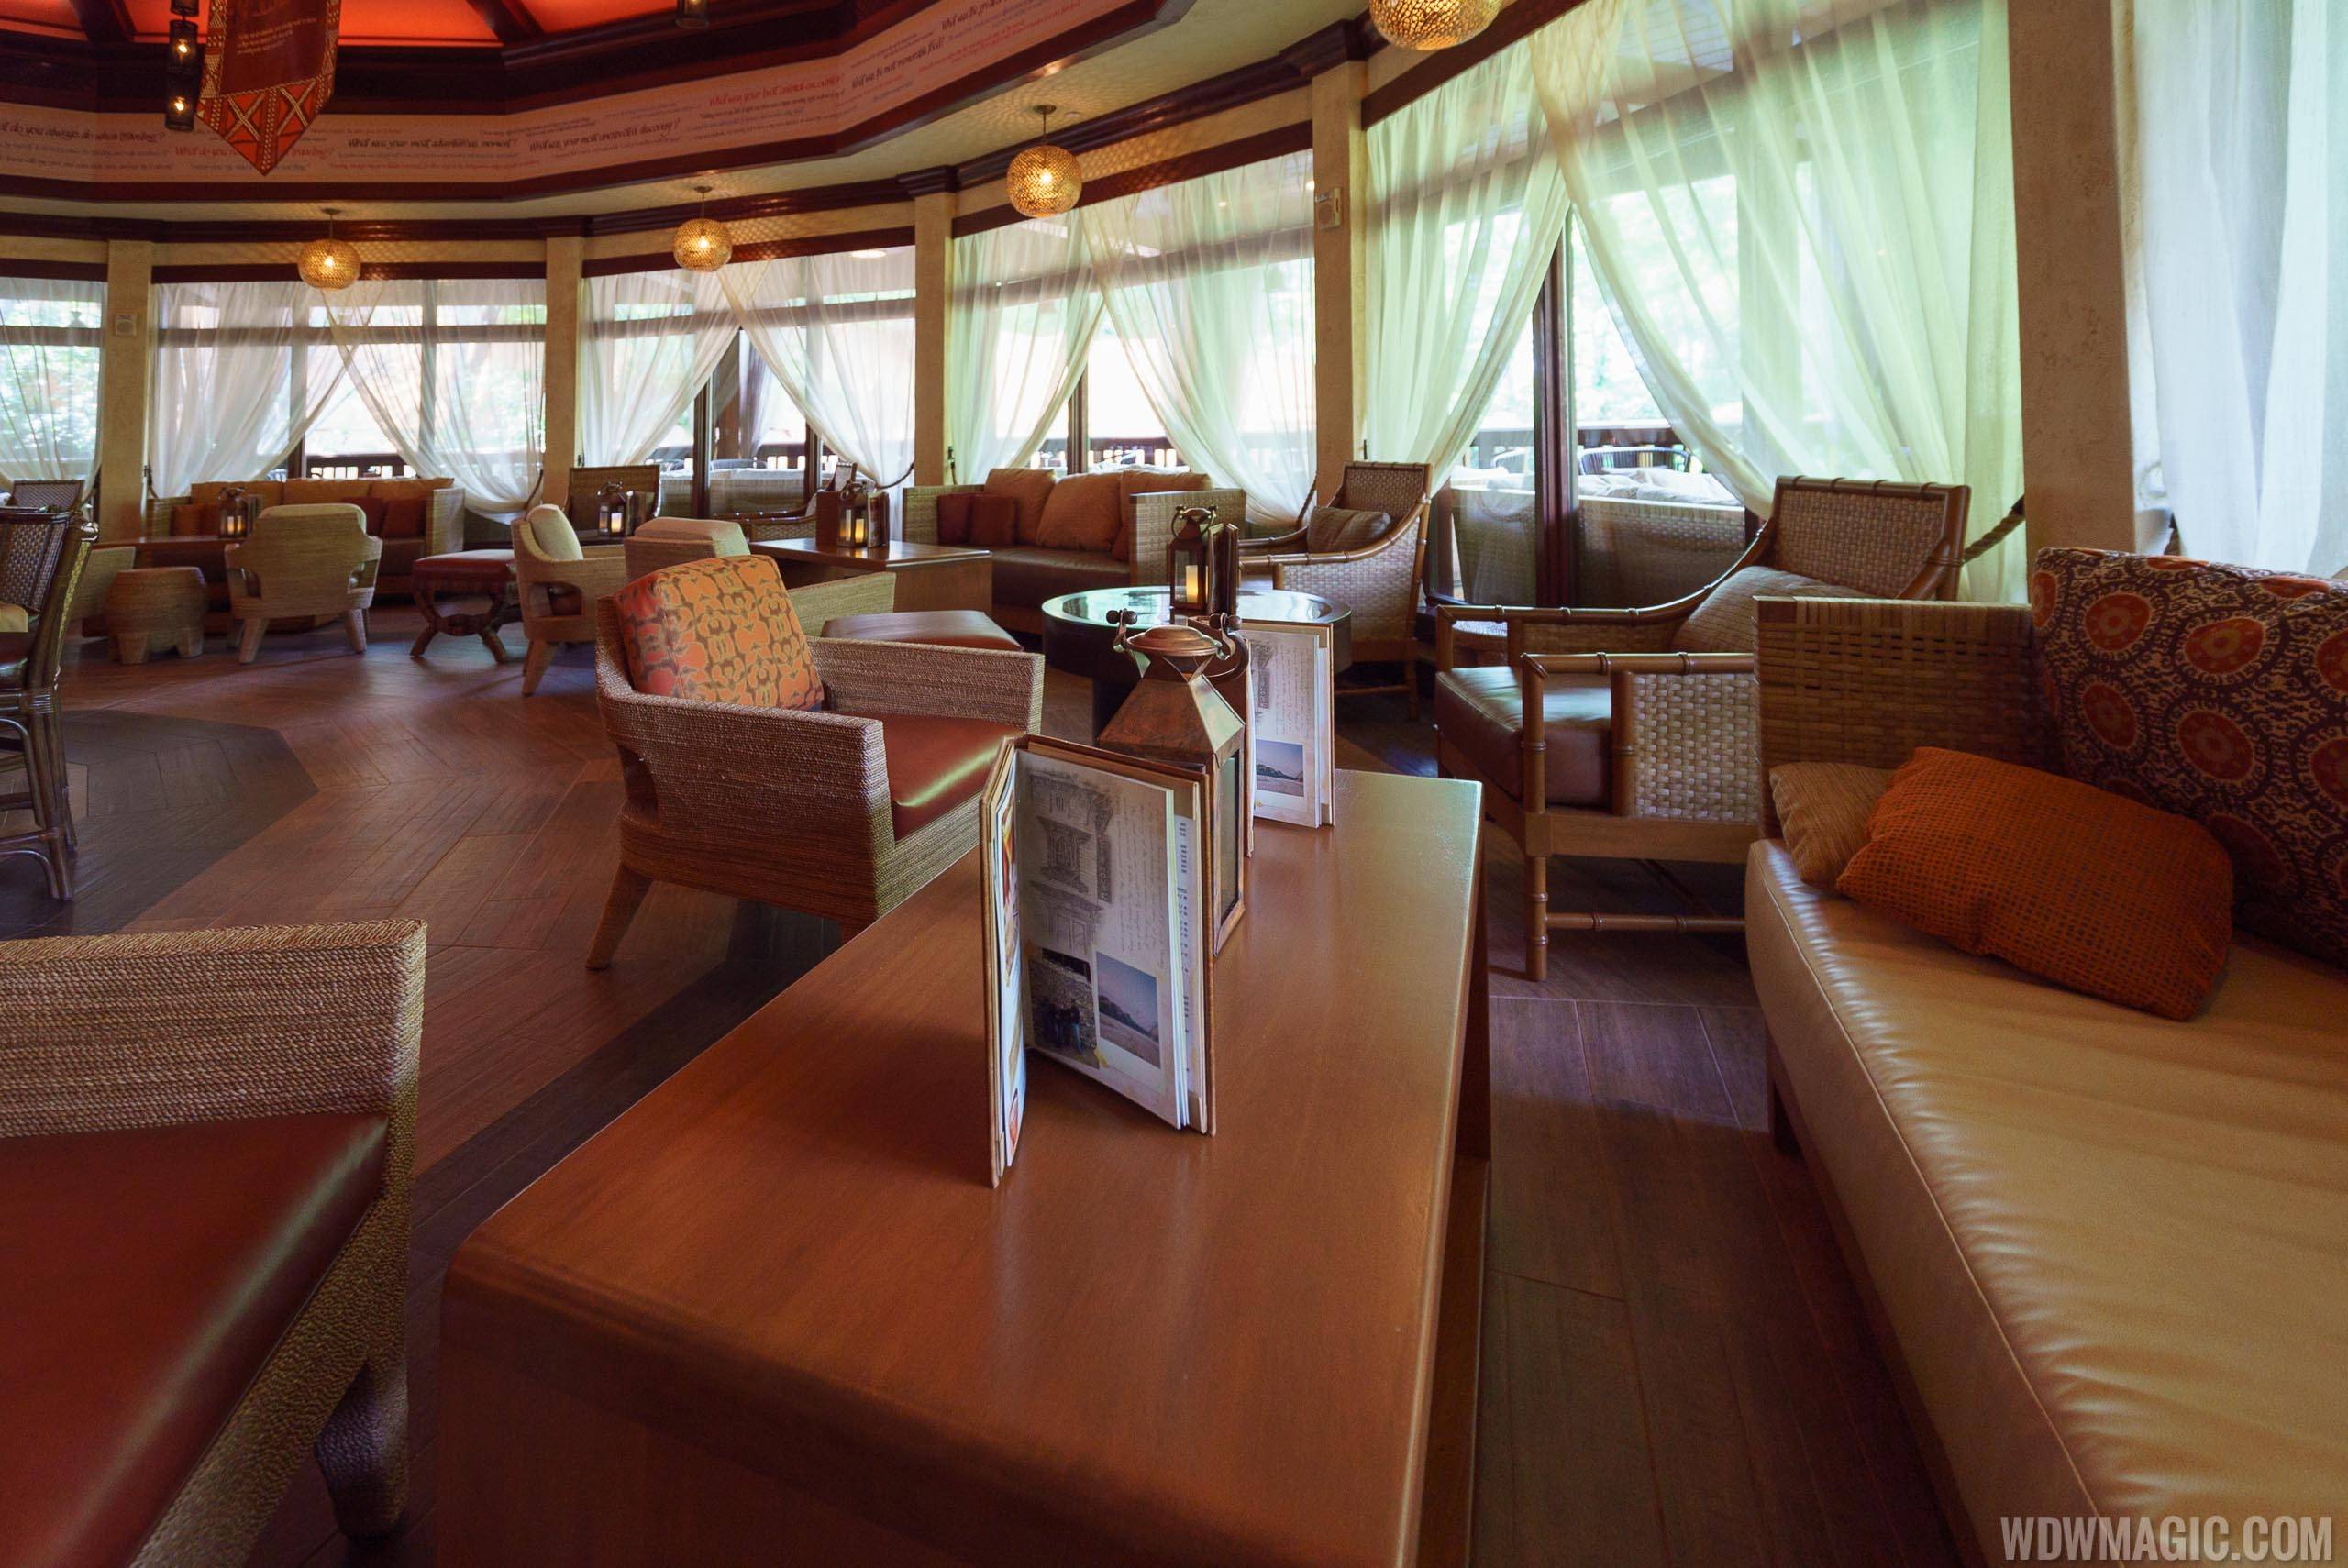 Nomad Lounge overview